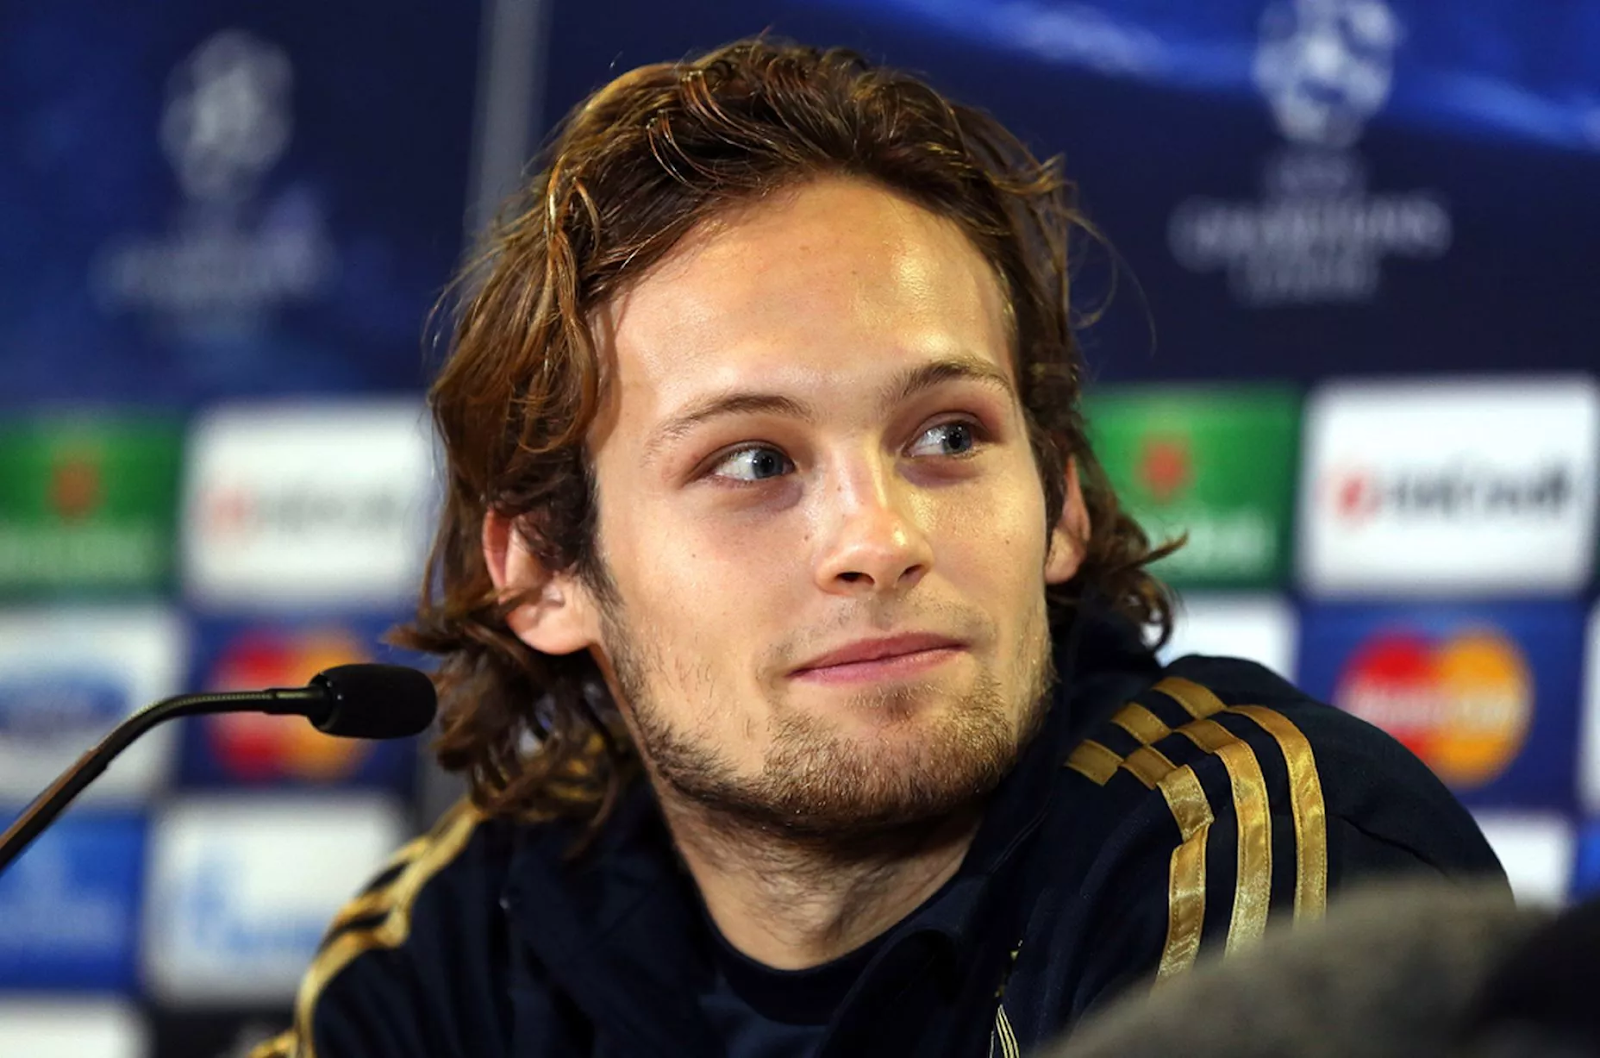 Daley Blind: A Versatile Defender with a Composed Presence